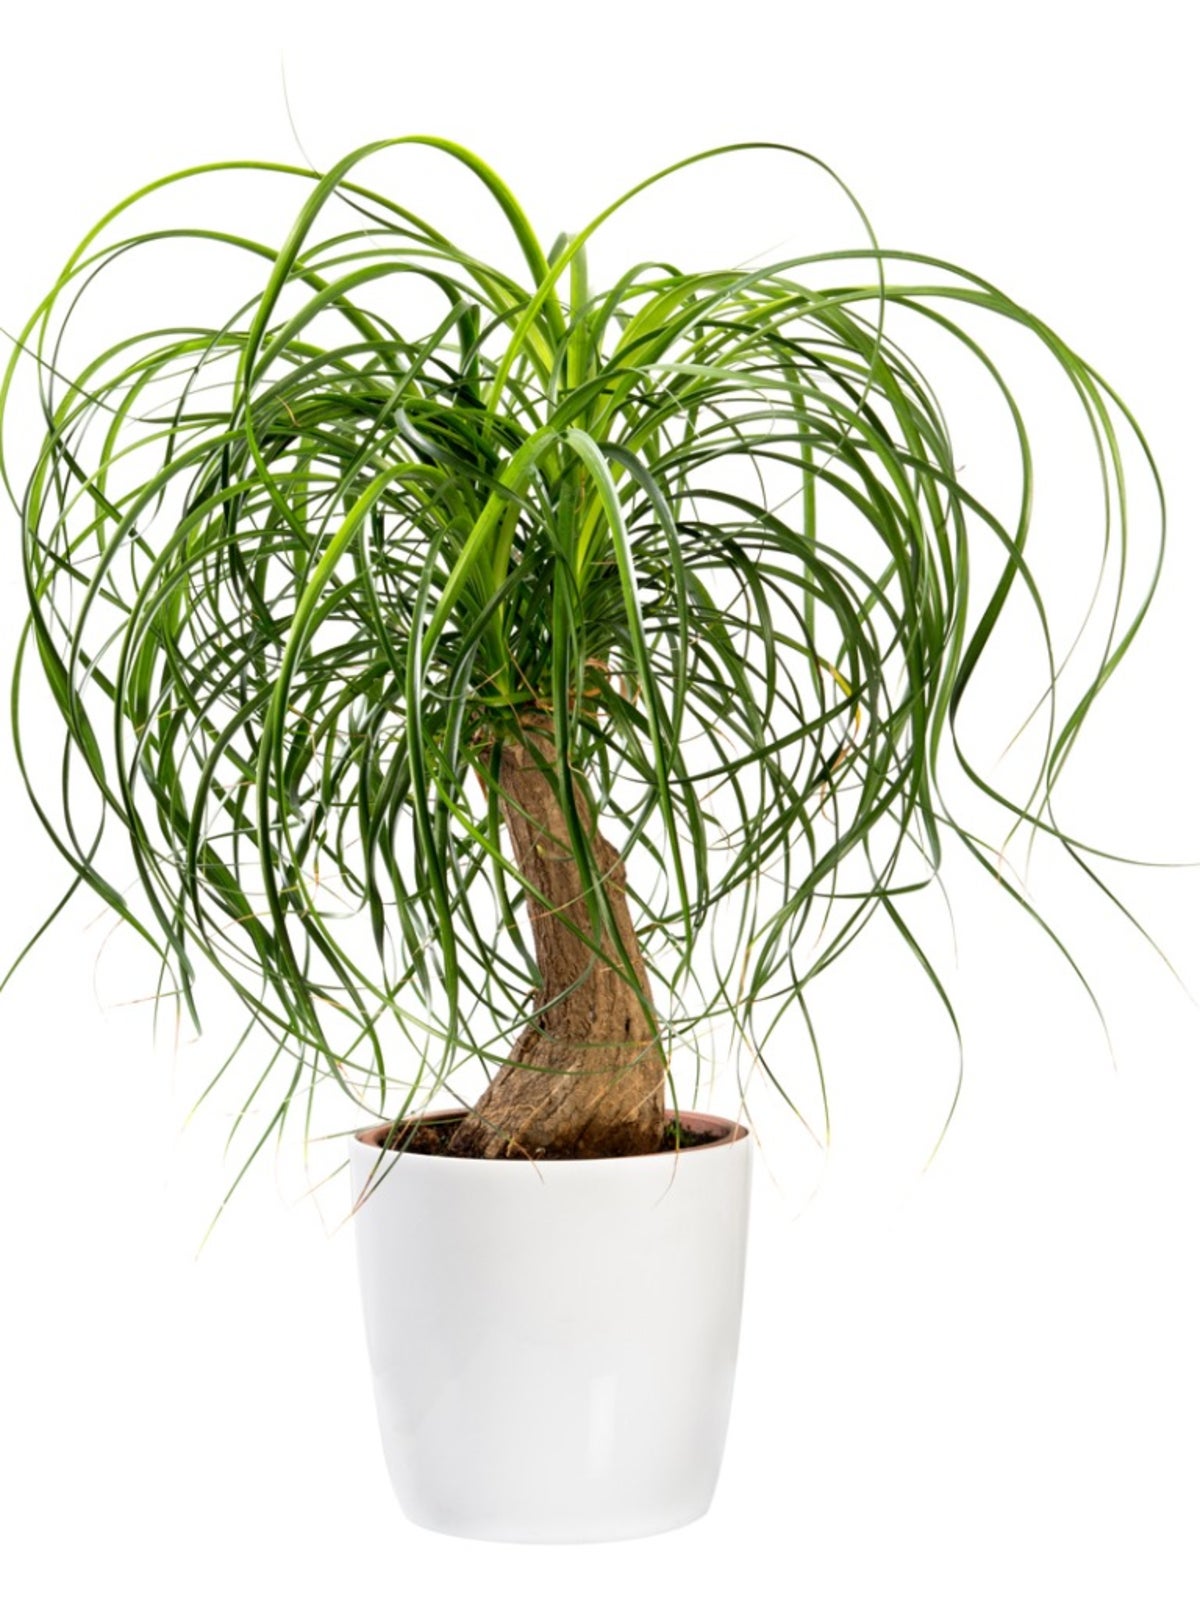 ponytail palm tree information - how to care for a ponytail palm